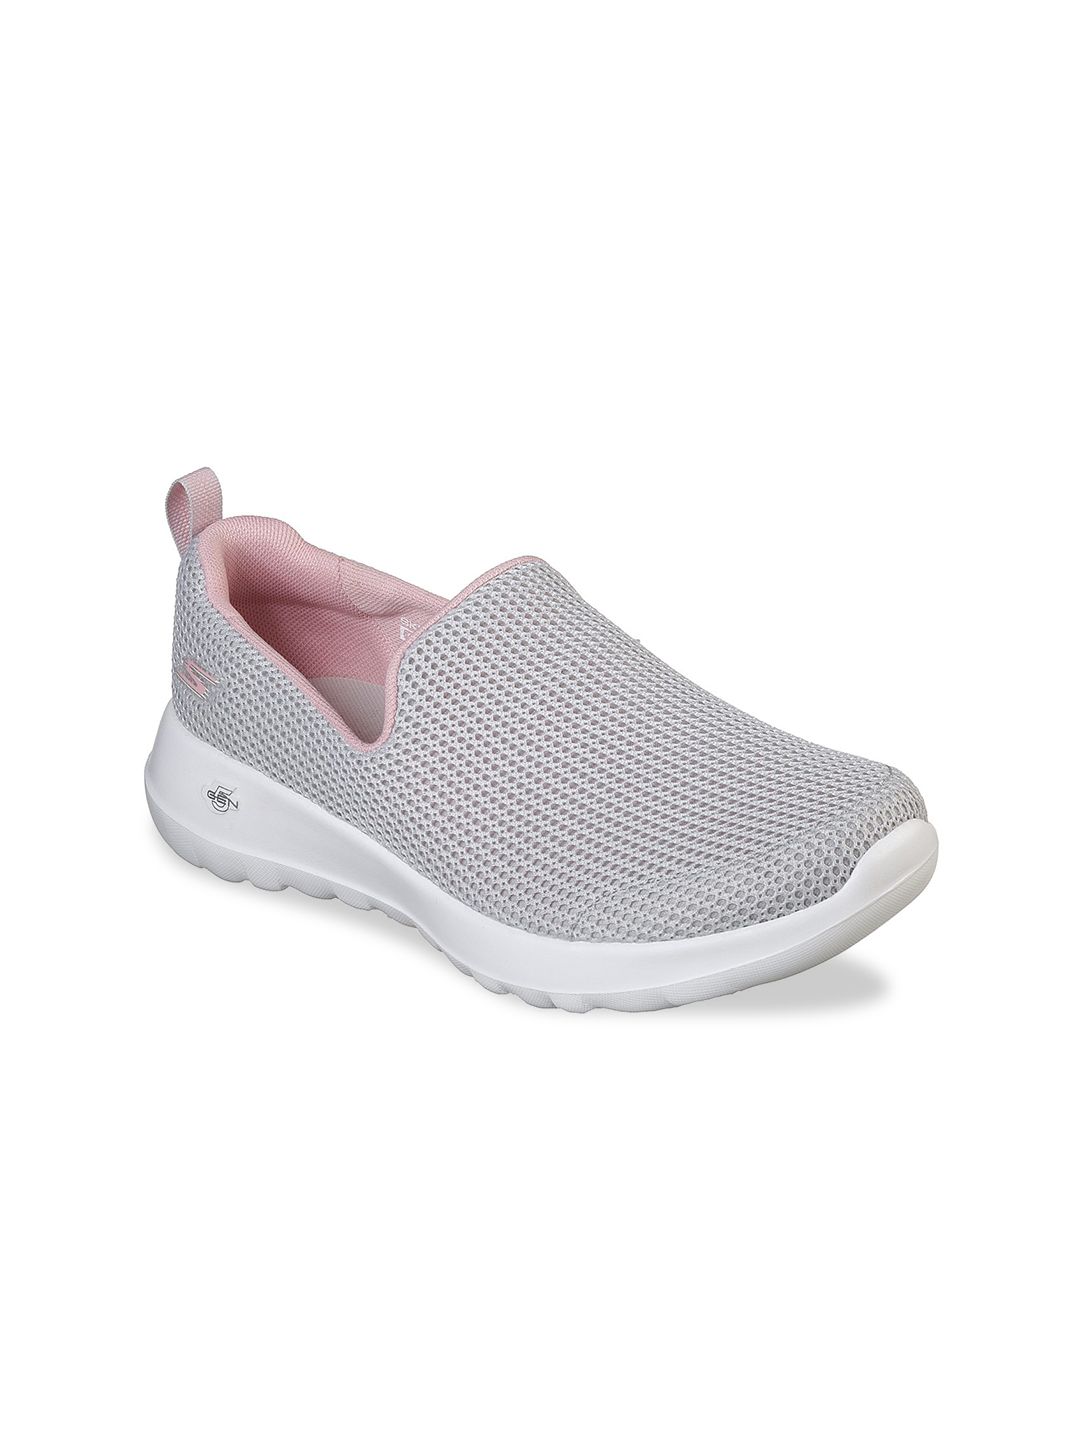 Skechers Women Grey Sports Shoes Price in India